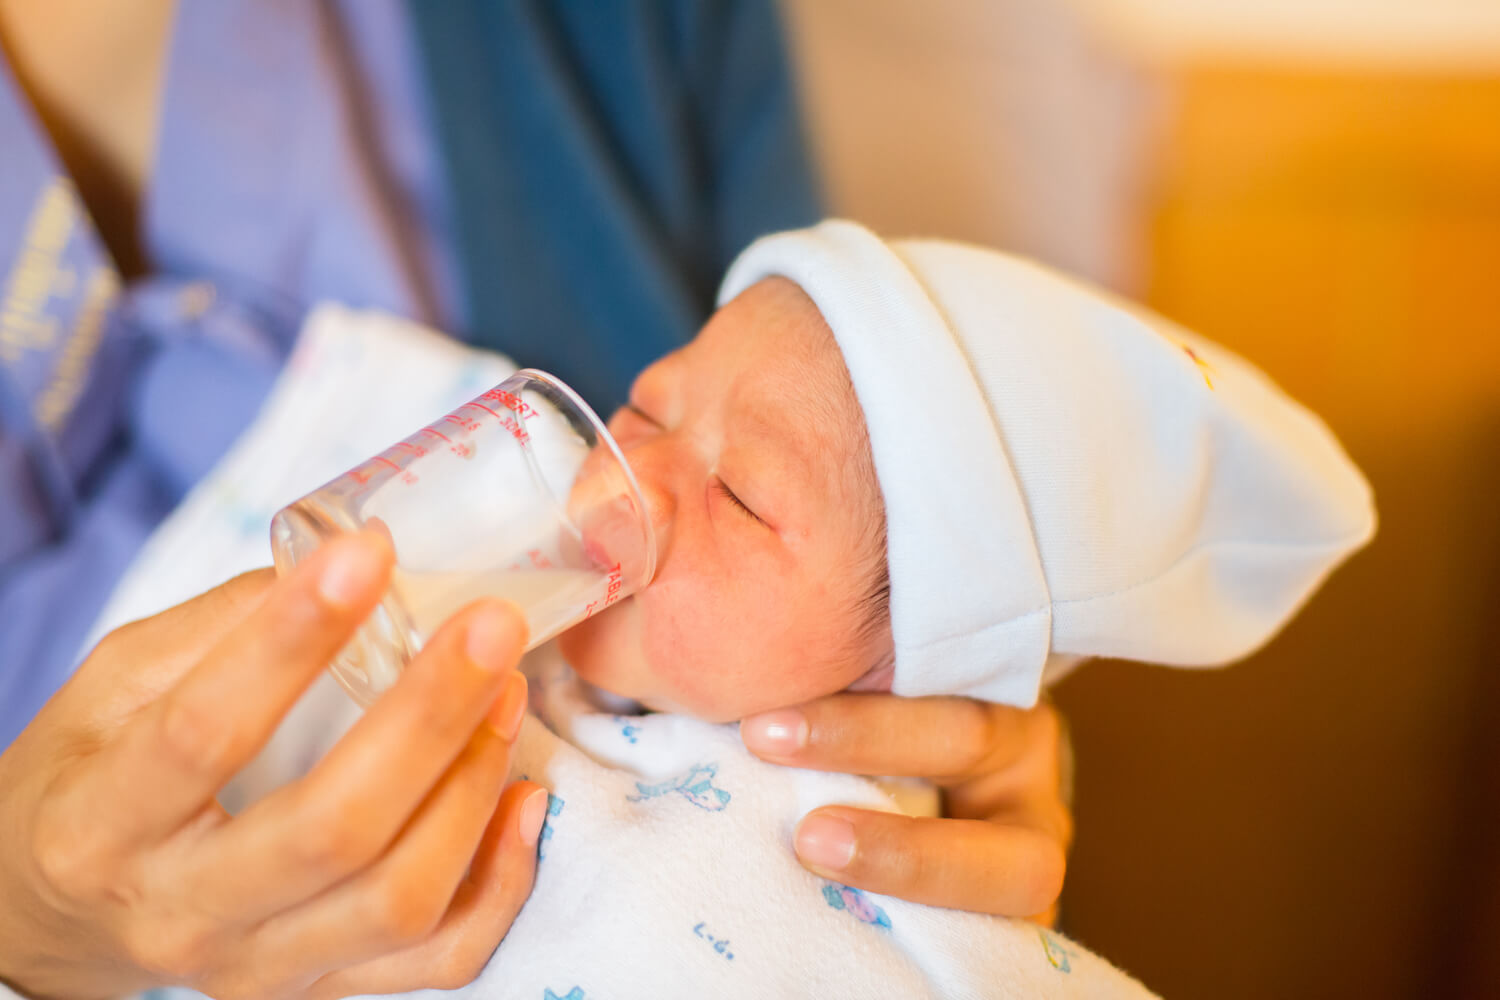 Cup Feeding a Baby – How To Do, Benefits and Alternatives